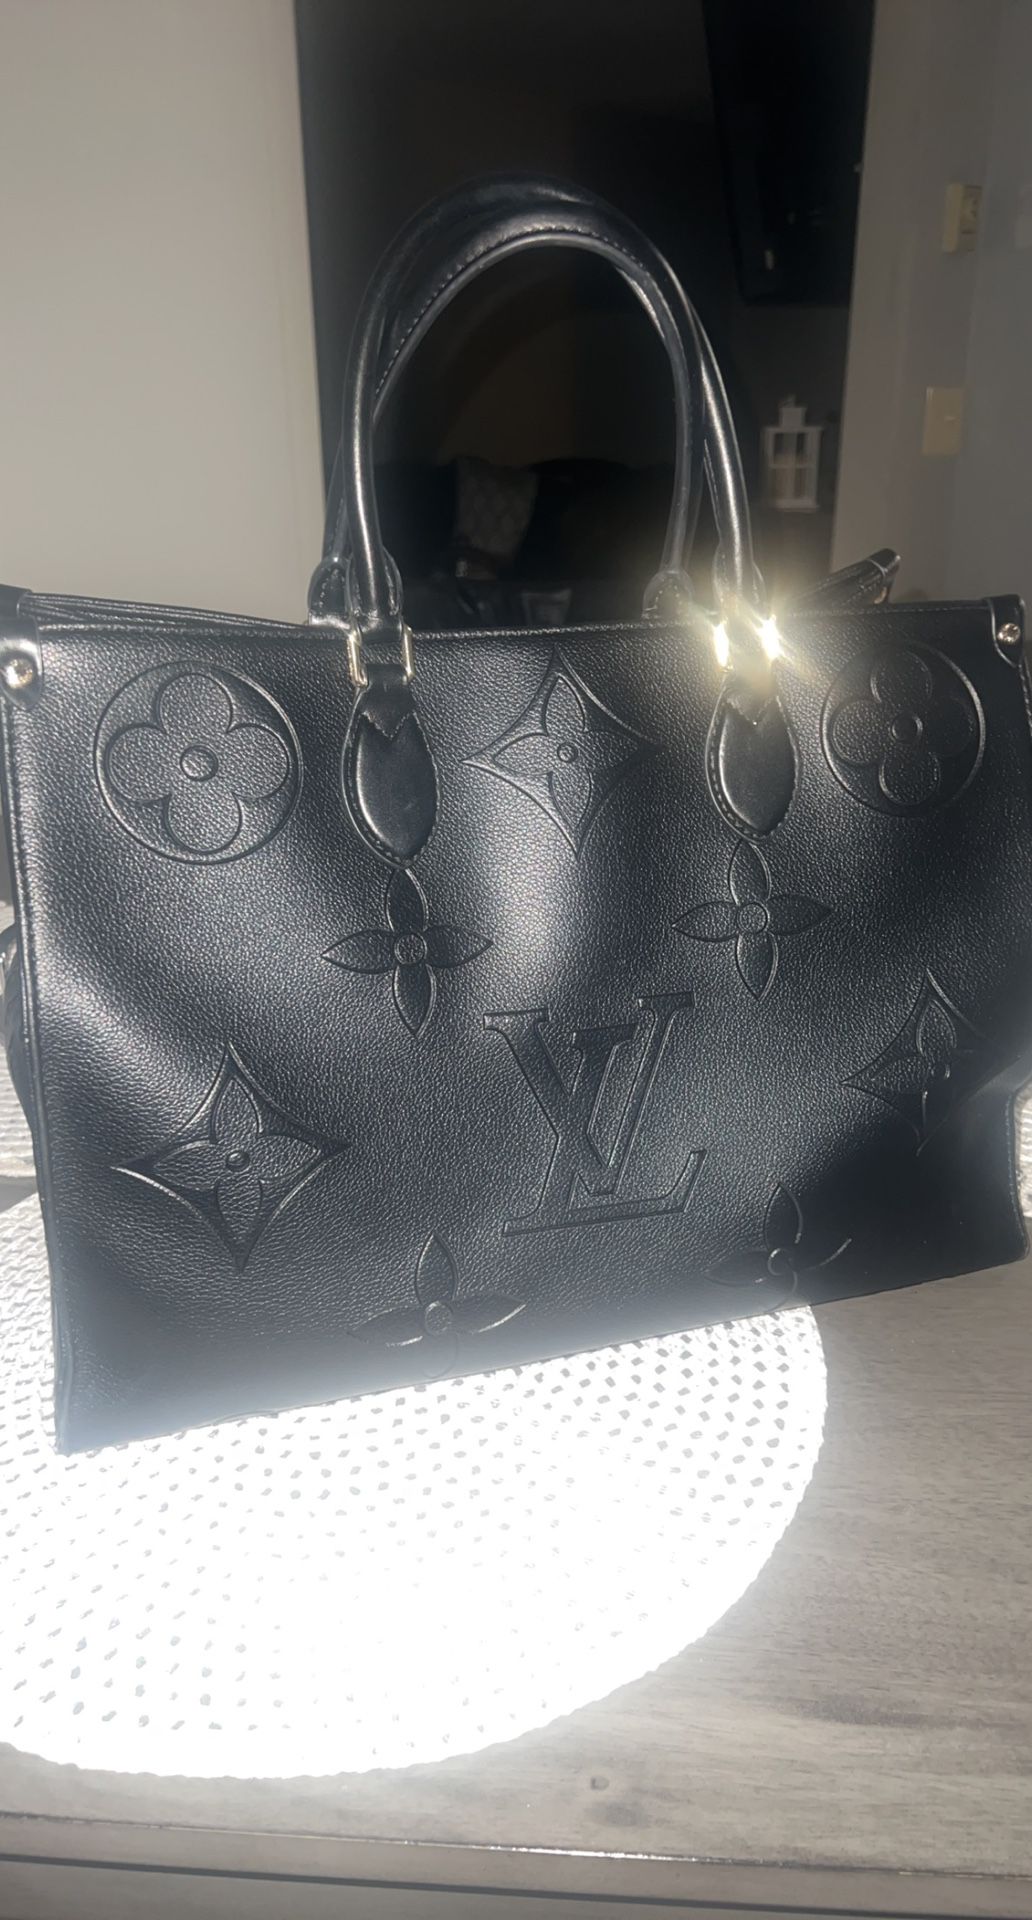 AUTHENTIC, BRAND NEW, NEVER USED, LOUIS VUITTON KIMONO MM MING NOIR, CALF  SKIN PURSE for Sale in Crum Lynne, PA - OfferUp